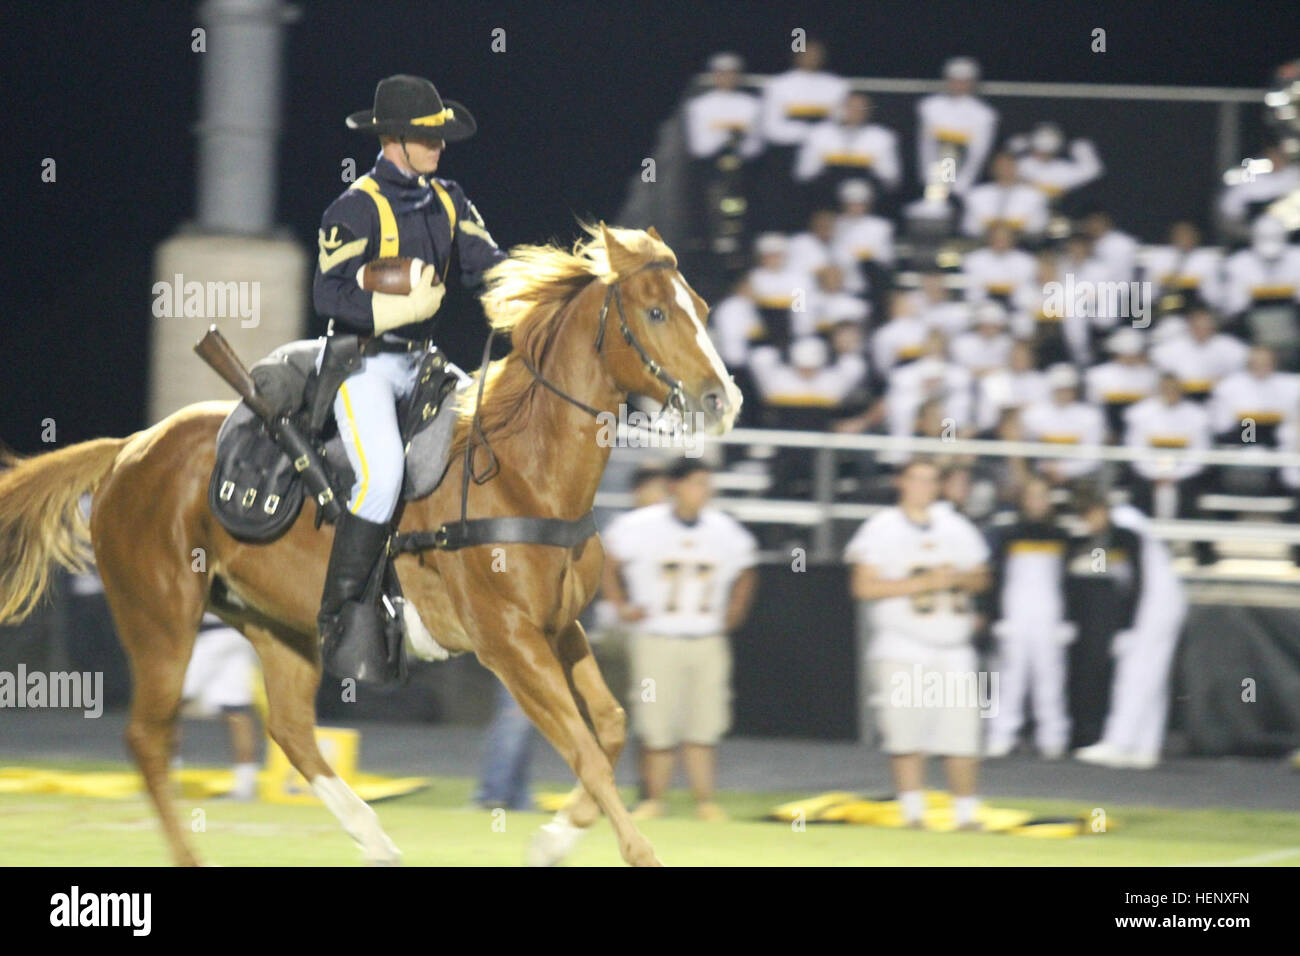 Sgt. Jessie Hurst, a Trooper with the U.S. Army’s 1st Cavalry Division Horse Detachment, delivers the game ball while riding “Hammer” in front of more than 500 attendees during a high school football game at Burnet, Texas, Oct. 24. Prior to kickoff, the 1st Air Cavalry Brigade, 1st Cav. Div.’s leadership was recognized for their community partnership with the city of Burnet, and the 1st Cav. Div. Horse Detachment presented the national colors. First Team honored during high school football game 141024-A-WD324-044 Stock Photo